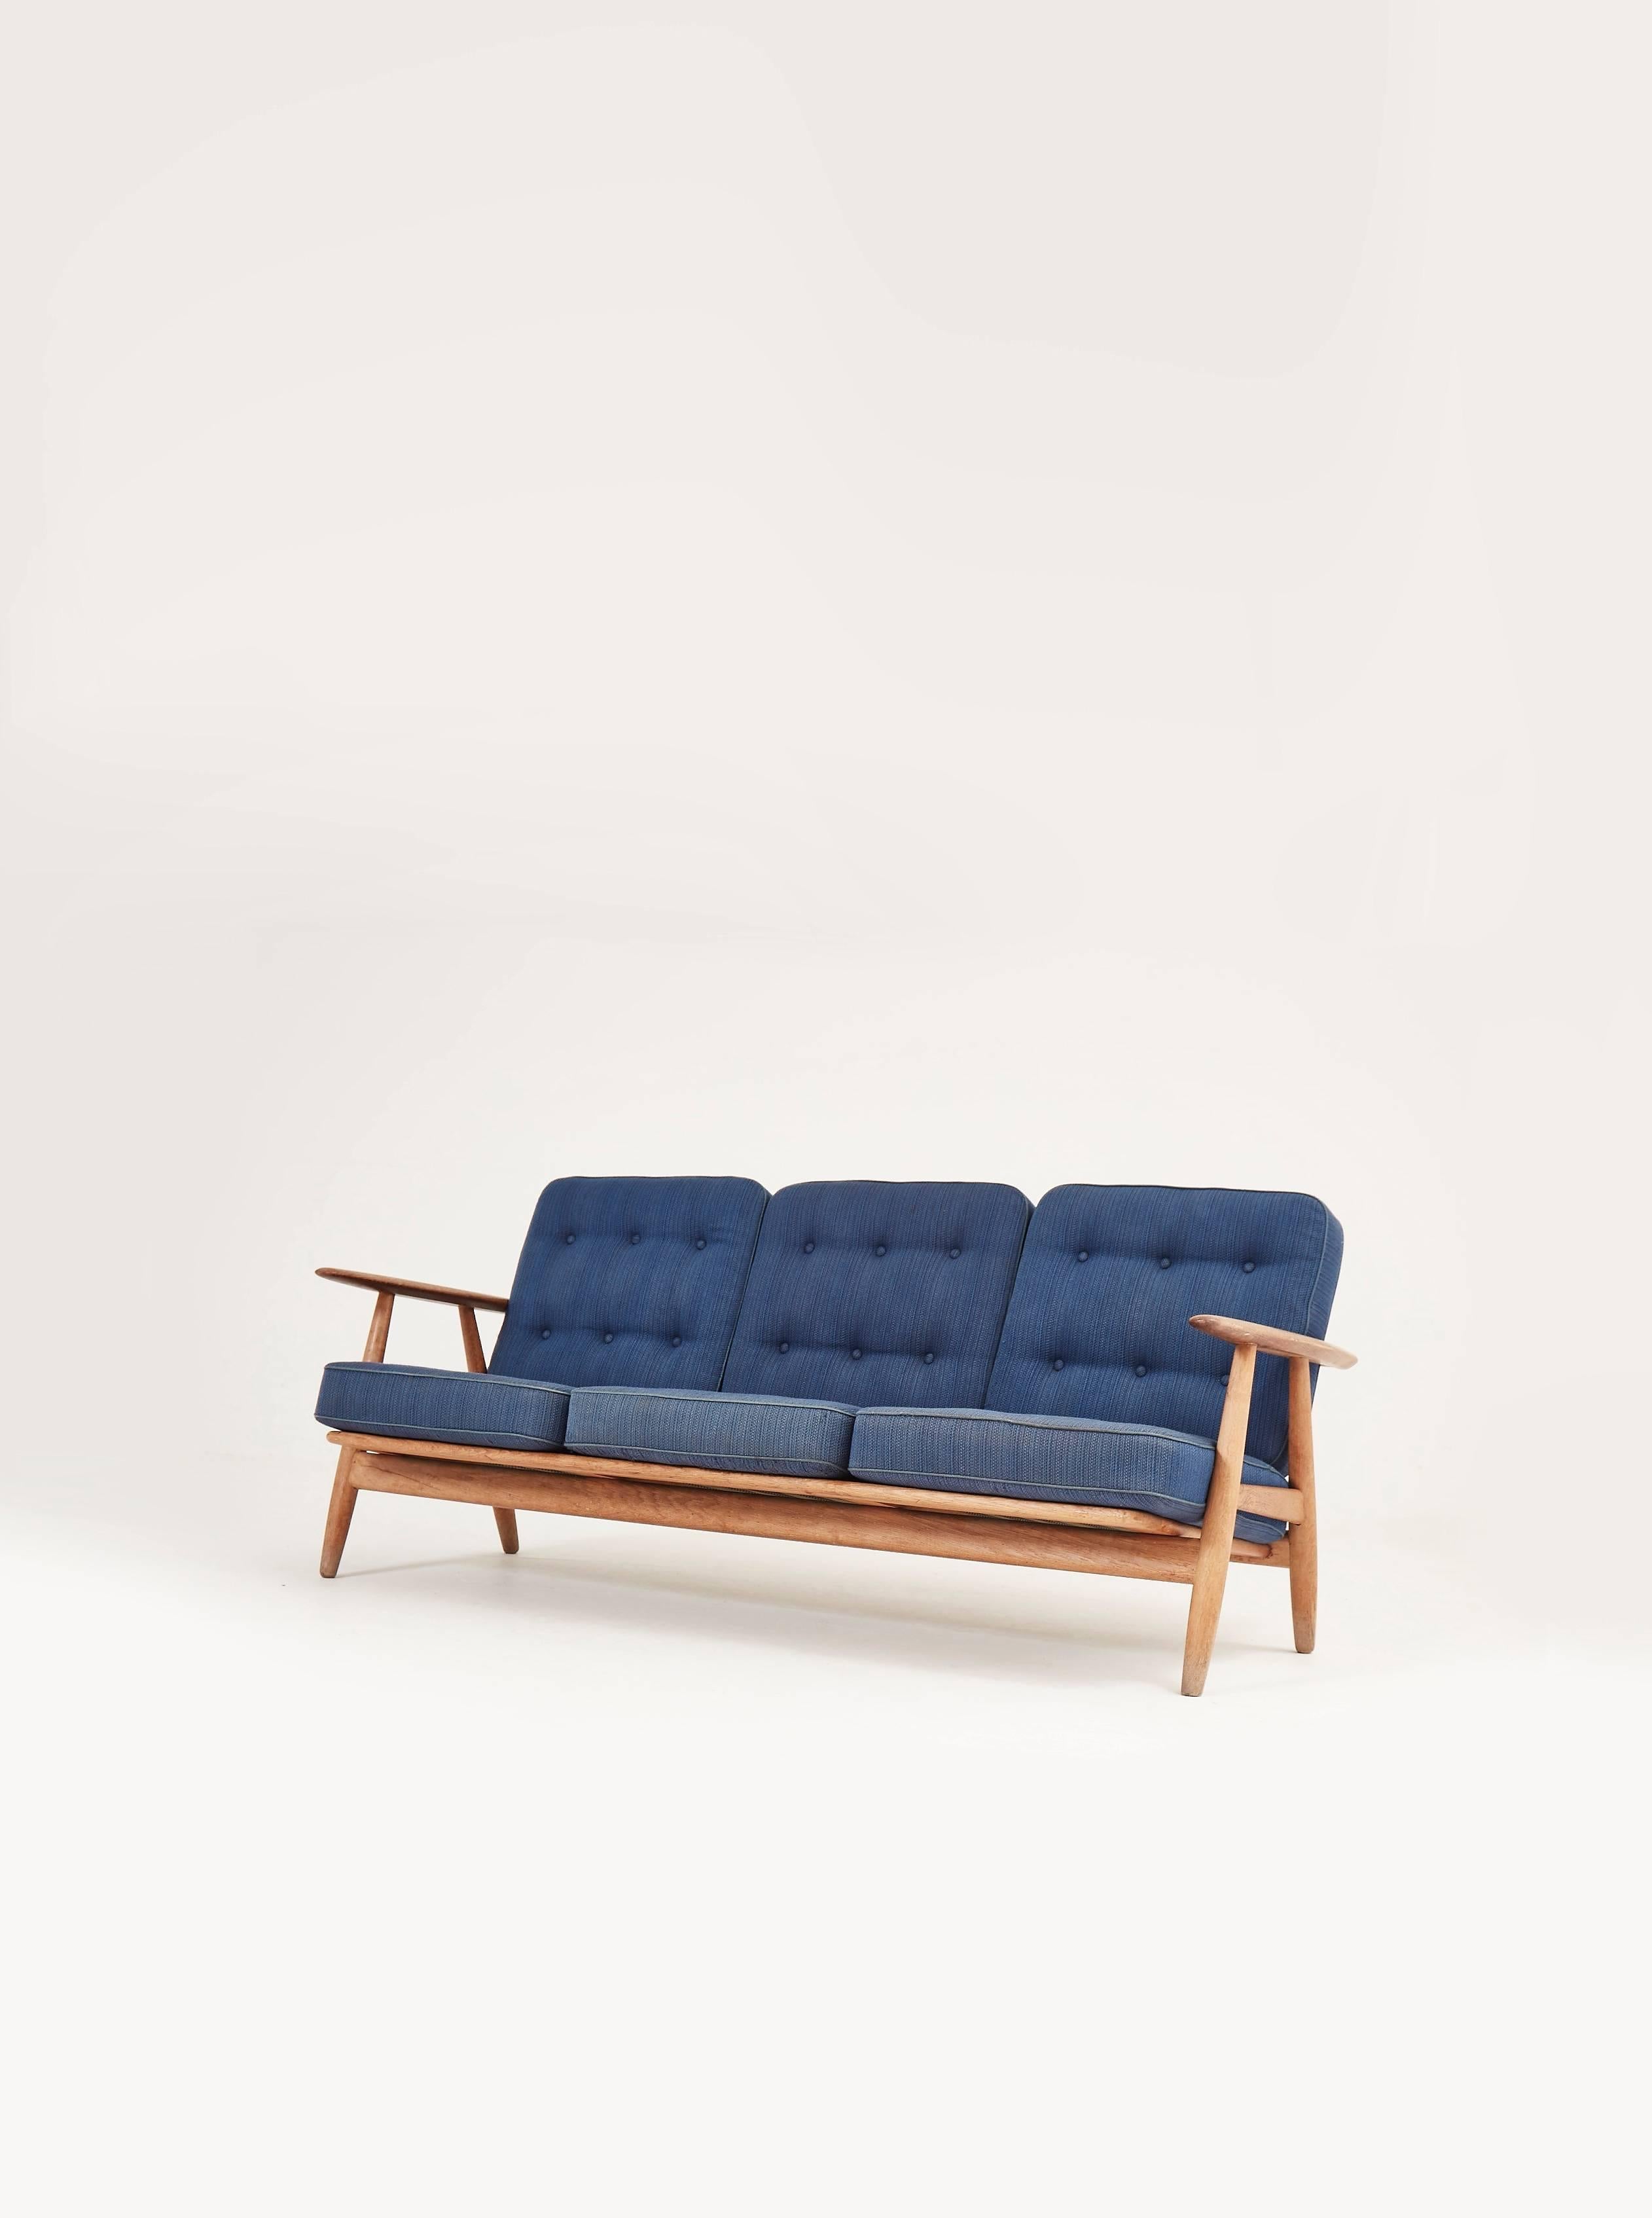 Early Hans Wegner oak cigar sofa, manufactured by GETAMA in Denmark, 1950s-1960s.

In original condition. Some signs of use and wear. Structurally sound, with beautiful all oak frame with some light marks, and original sprung cushions. Original